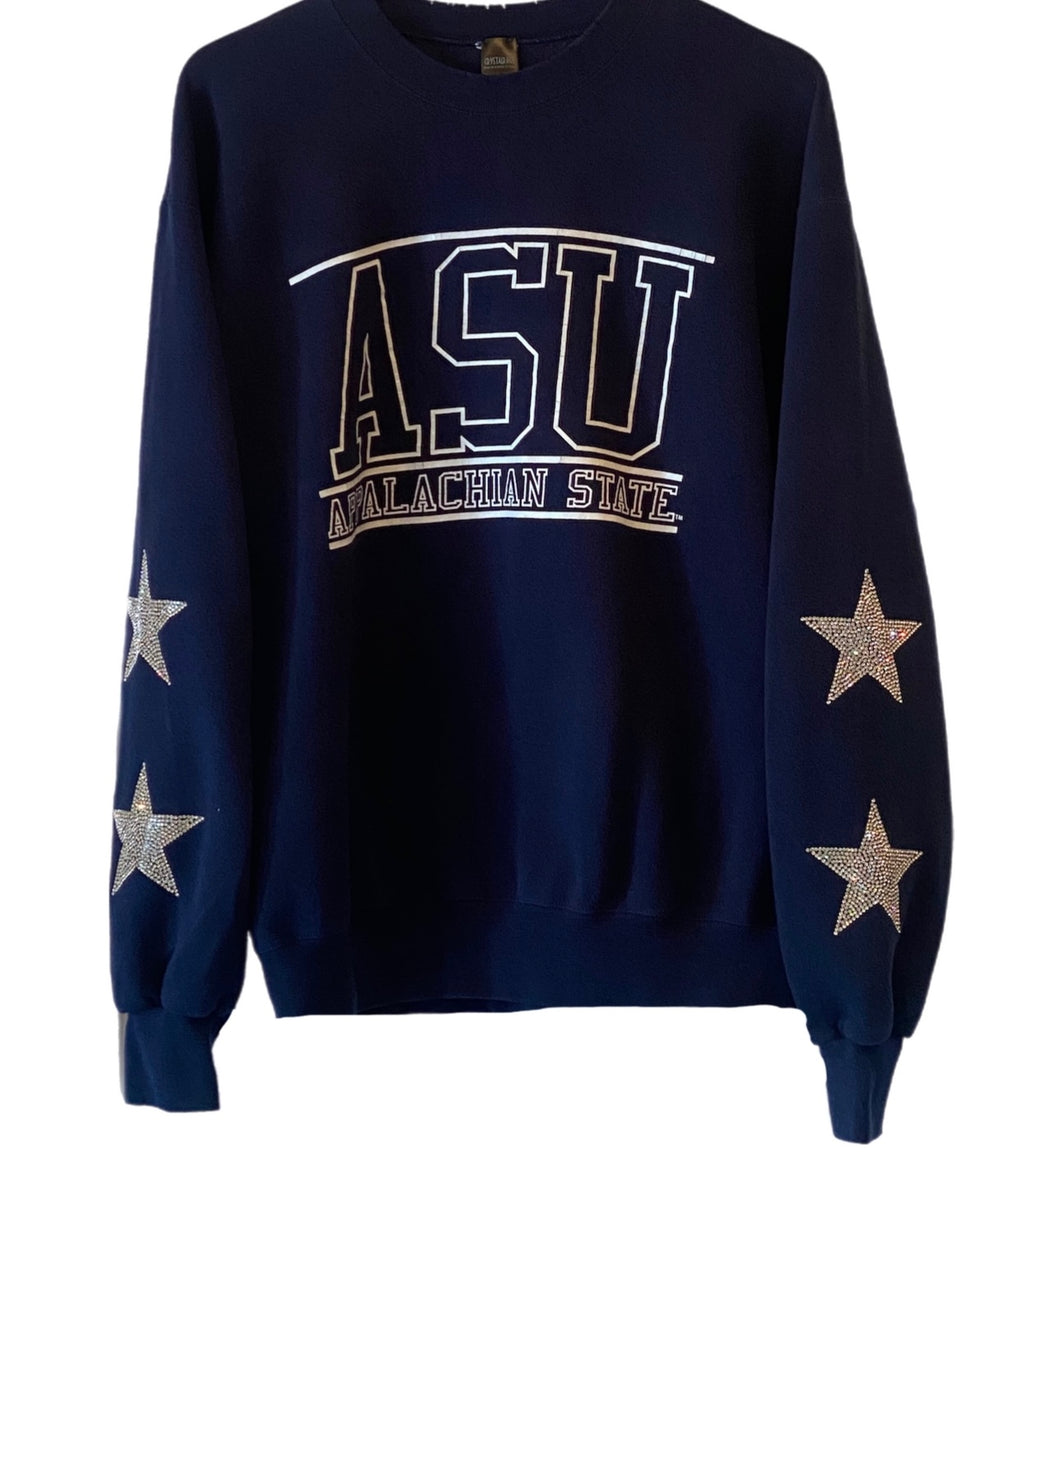 Appalachian State University, One of a KIND Vintage USF Sweatshirt with Crystal Star Design